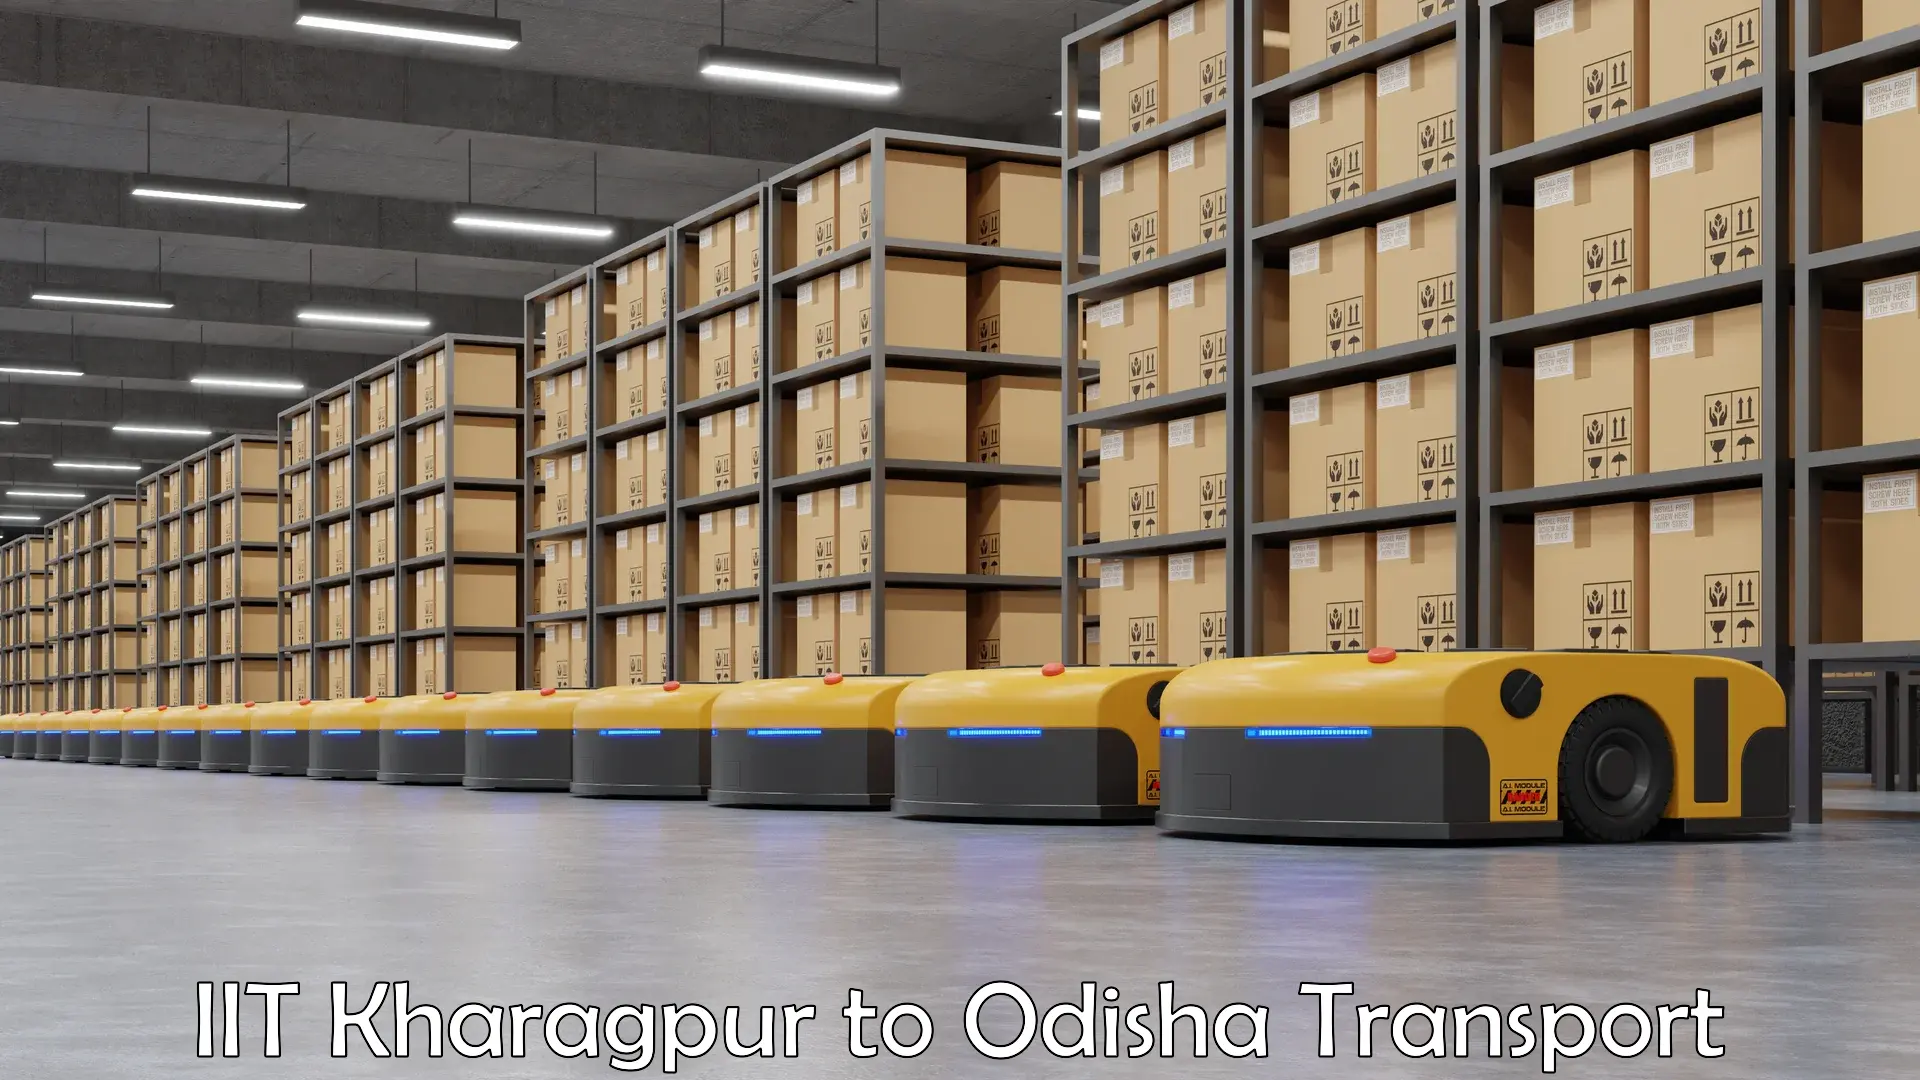 Commercial transport service IIT Kharagpur to Jagatpur